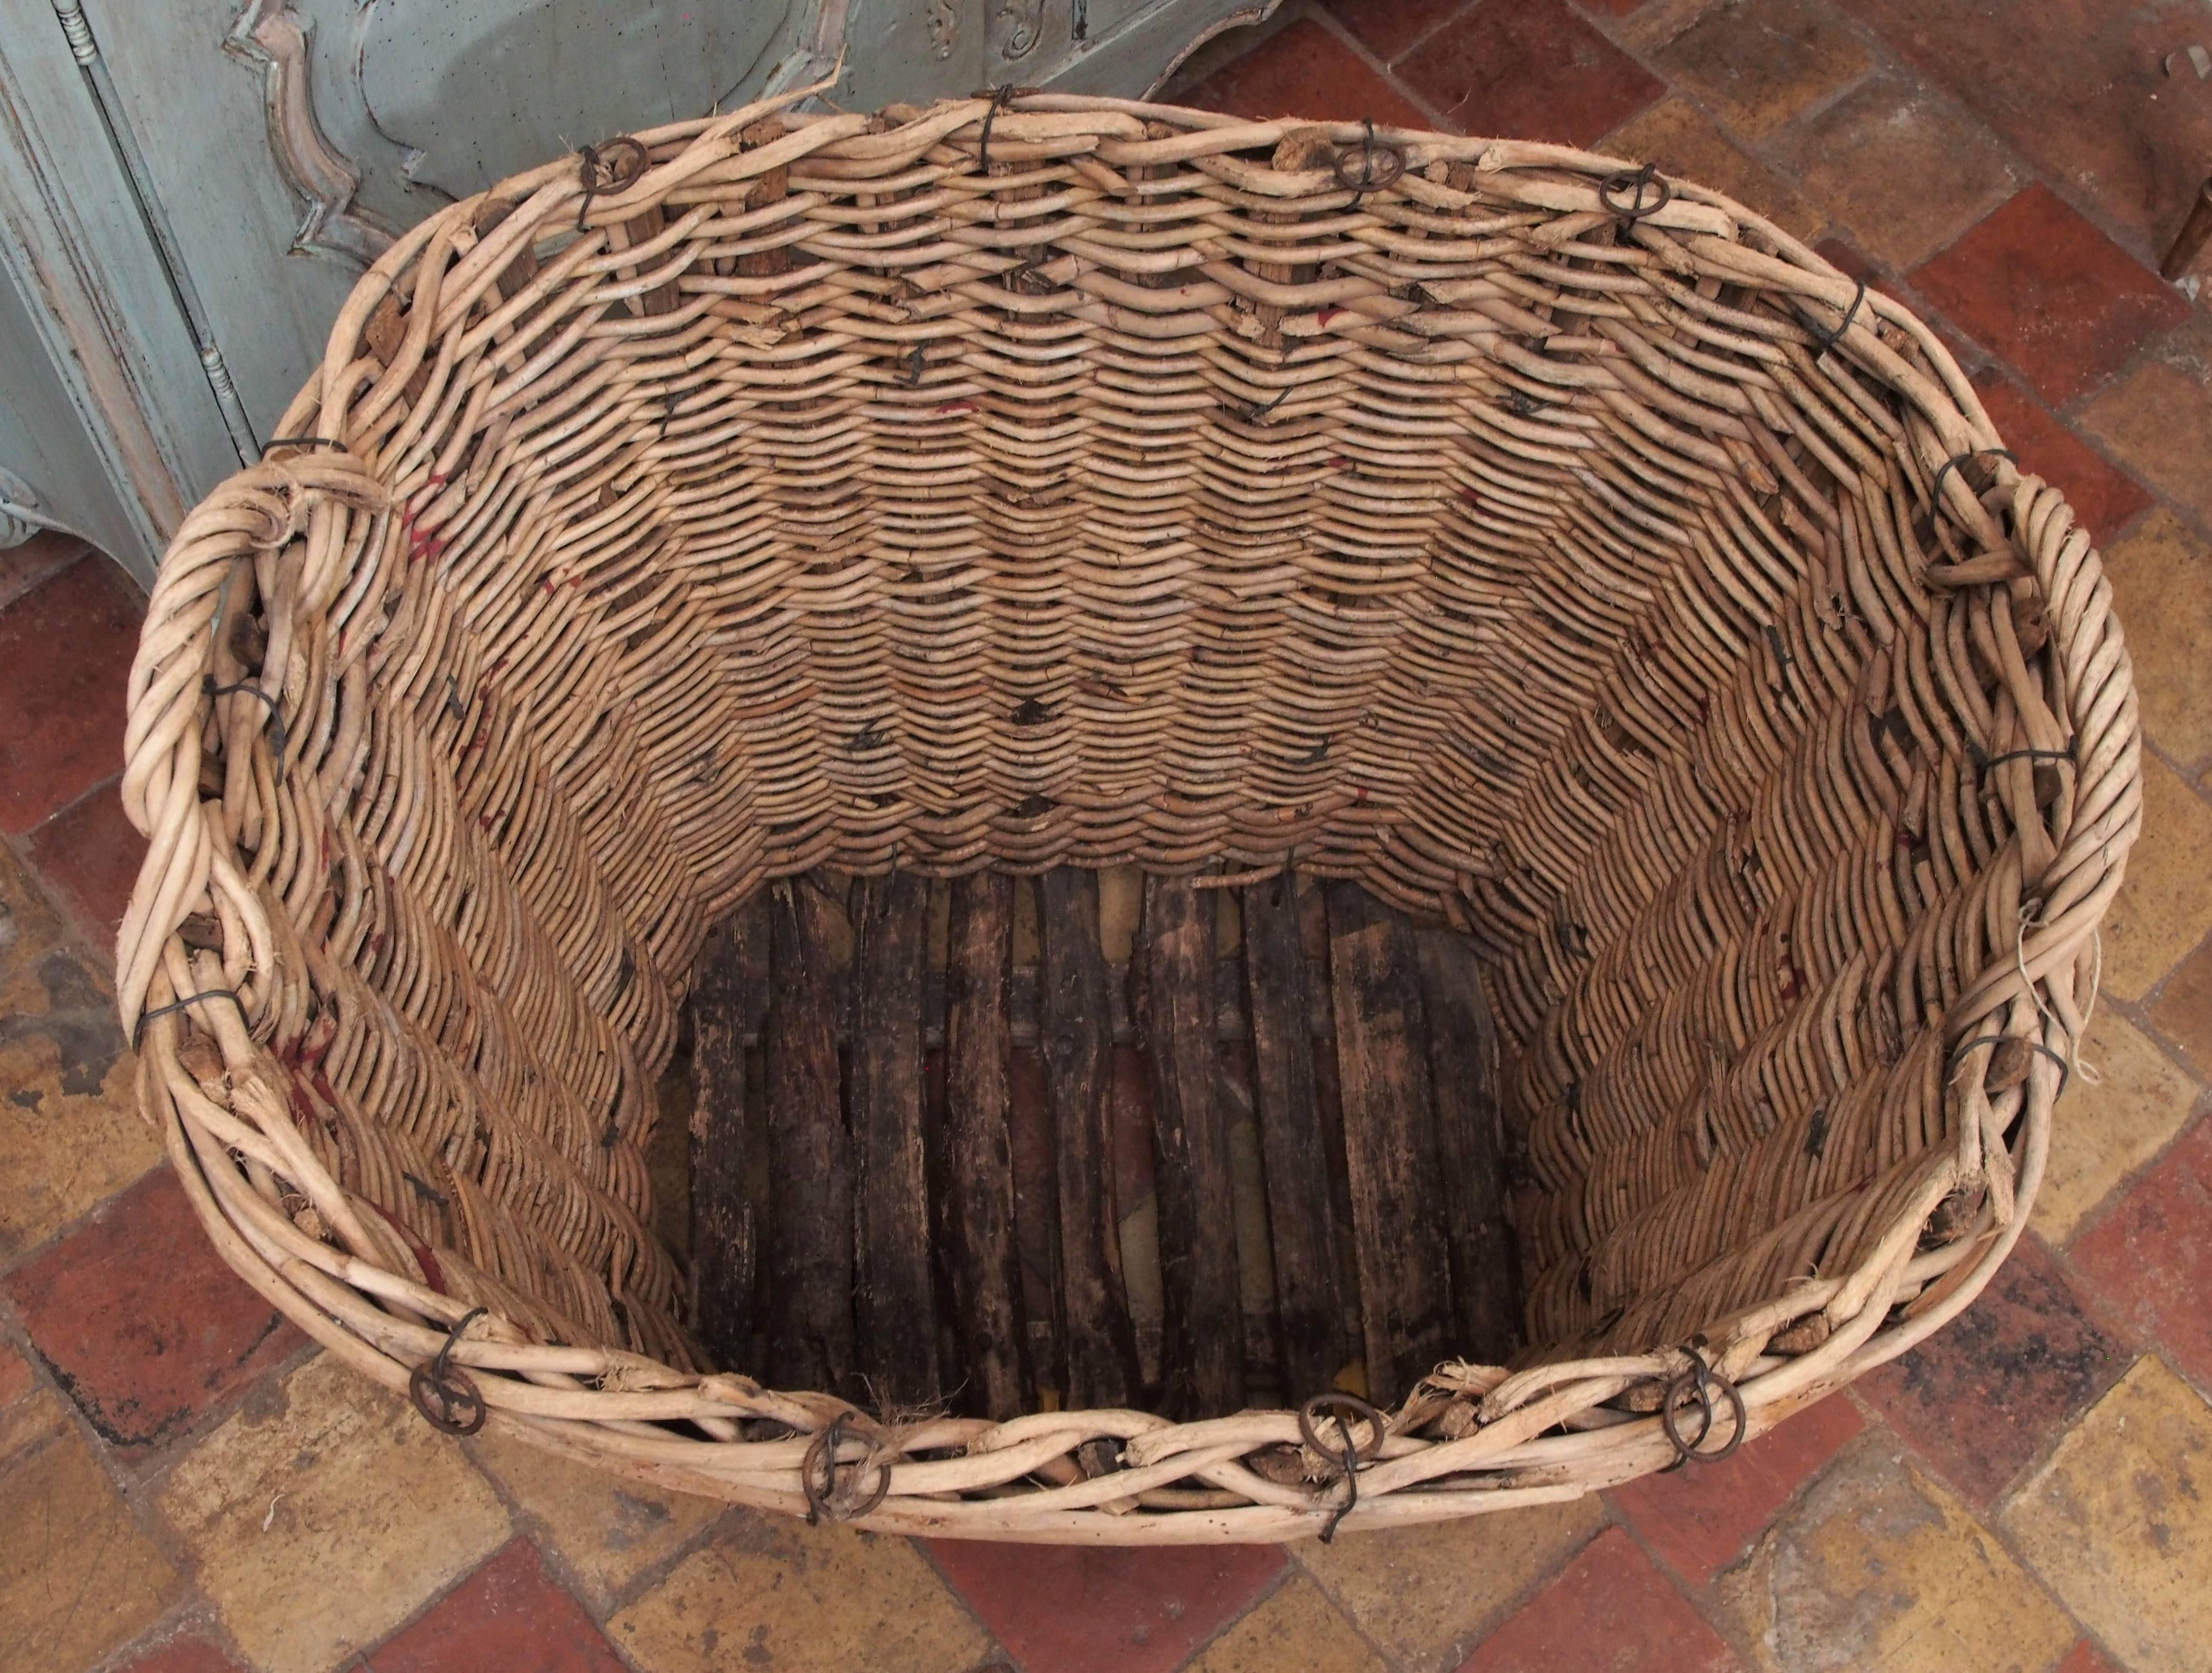 Early French handwoven reed basket used for gathering grapes for champagne, circa 1900.